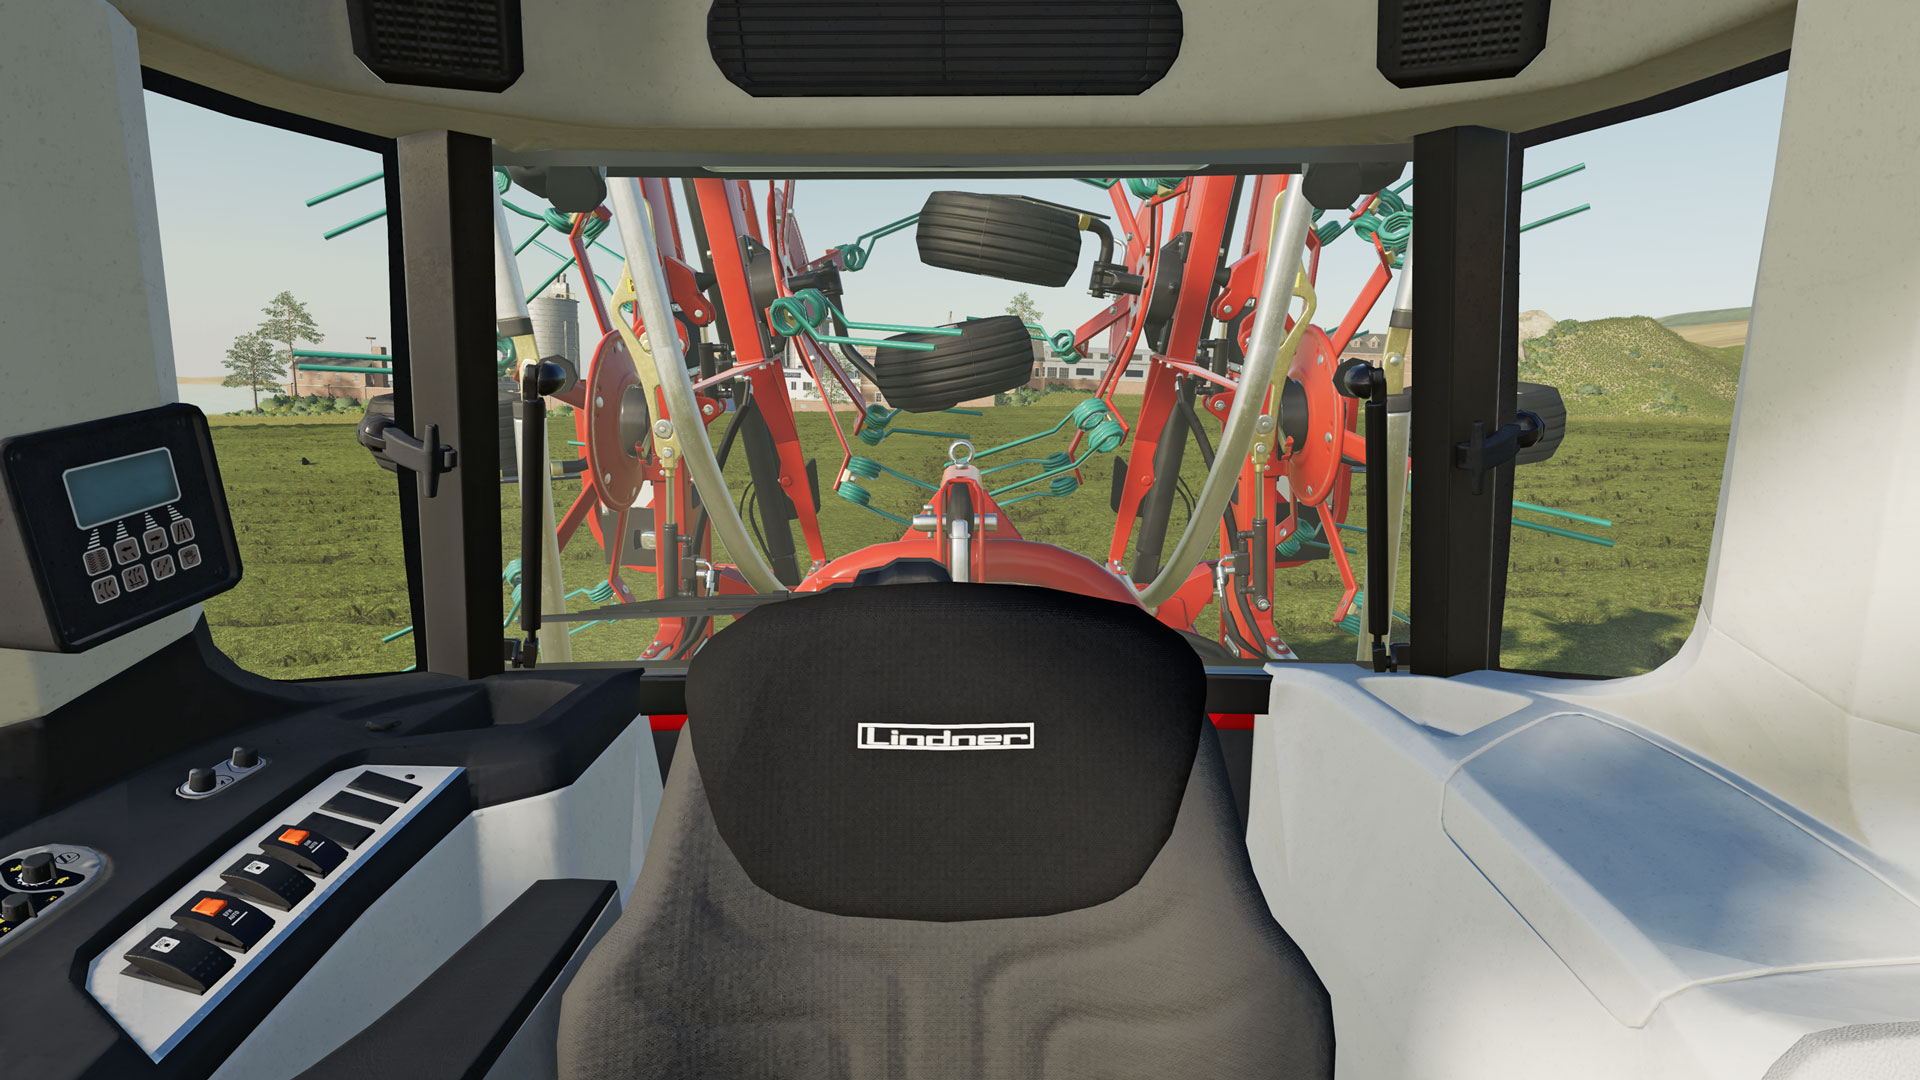 Video Chat Backgrounds - Farming Simulator Style! 